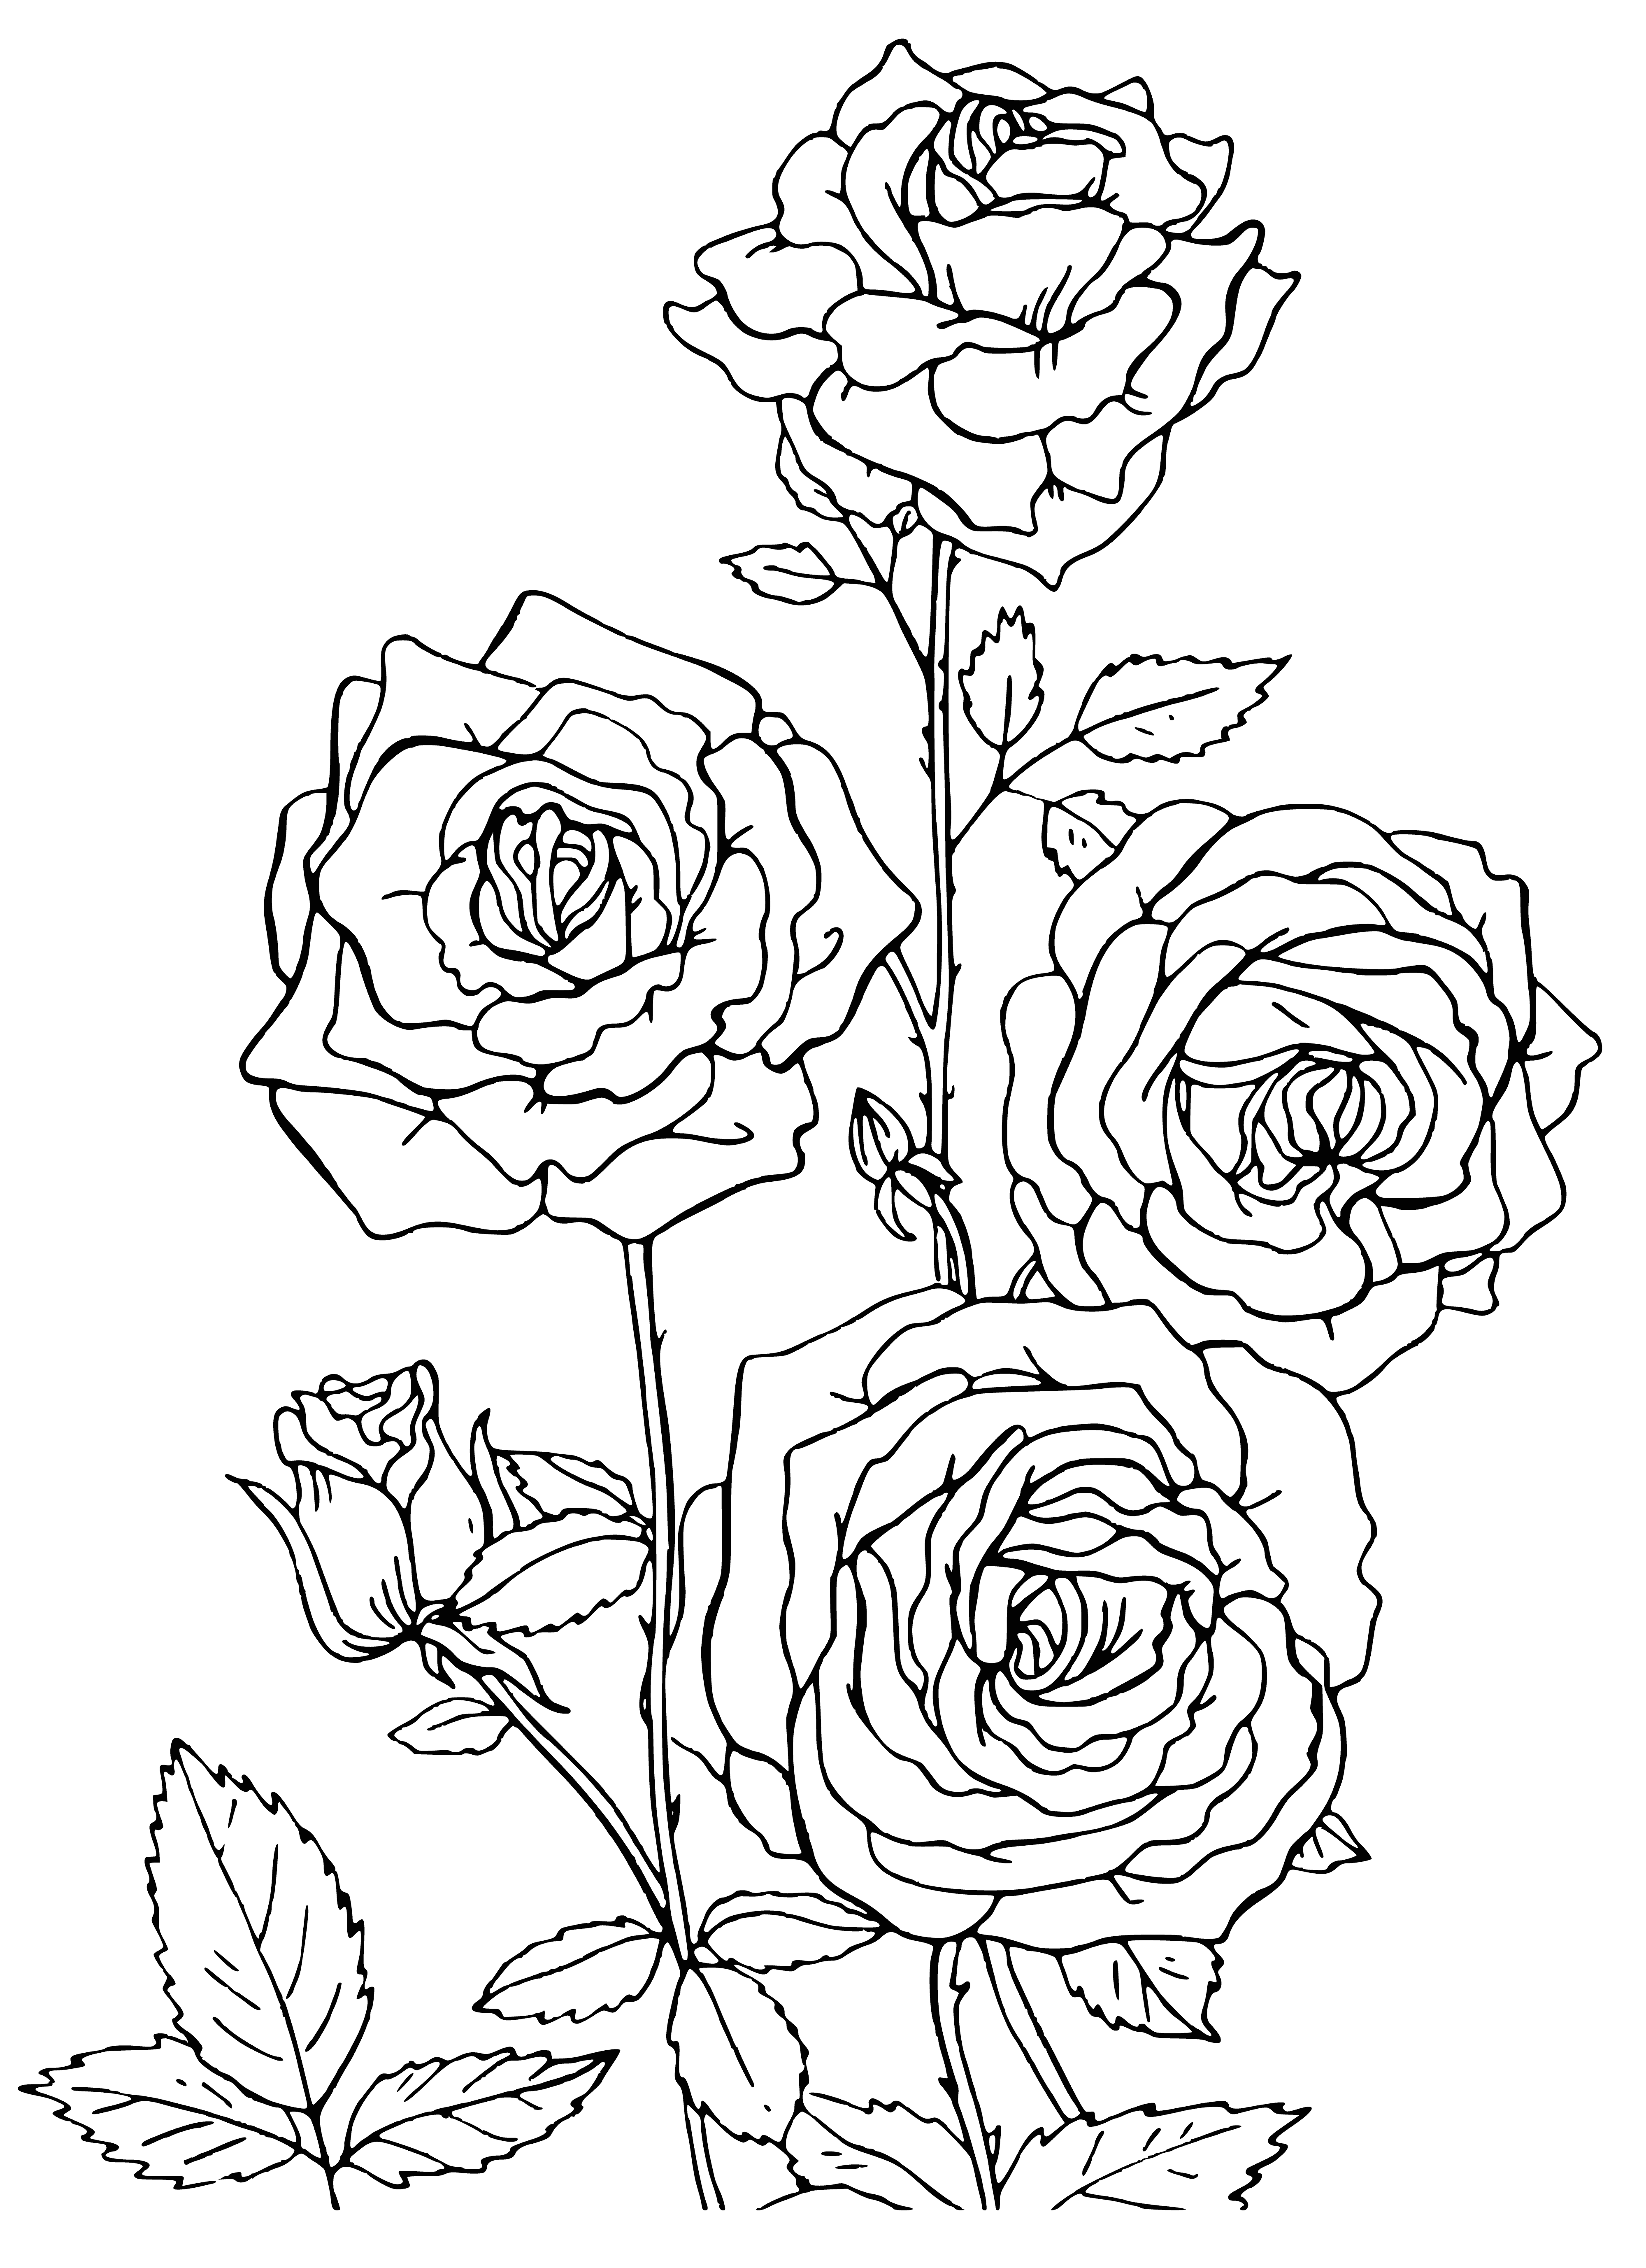 coloring page: A stunning bouquet of 12 red roses with long stems, green leaves, & water droplets on petals in full bloom.